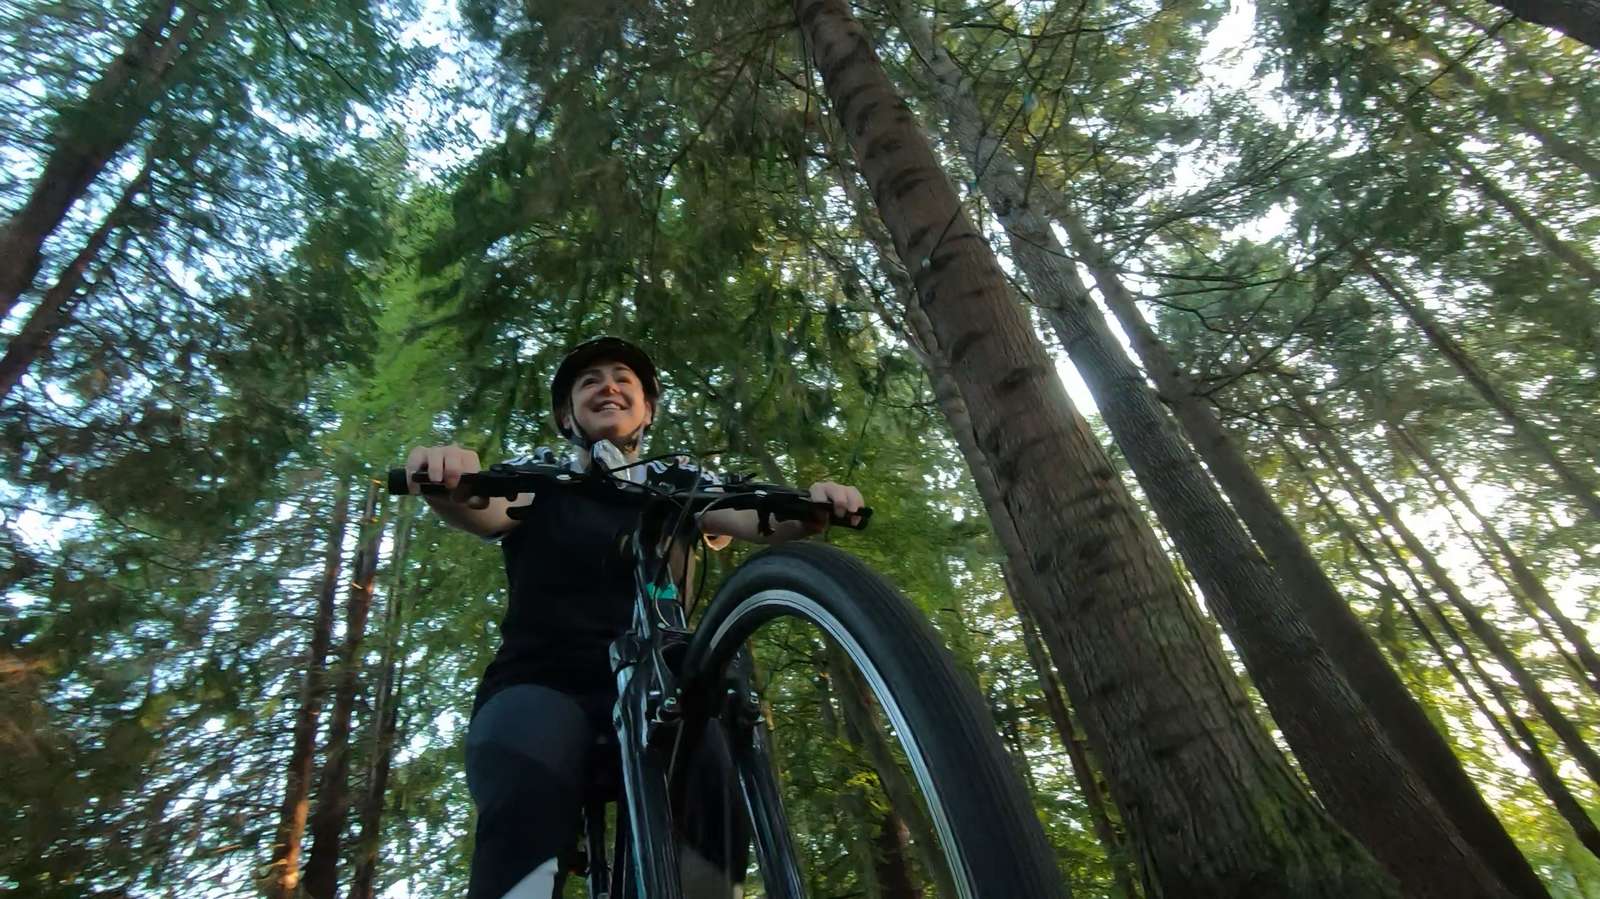 The camera looks up at a woman in dark clothing rides her bicycle through a woodland area